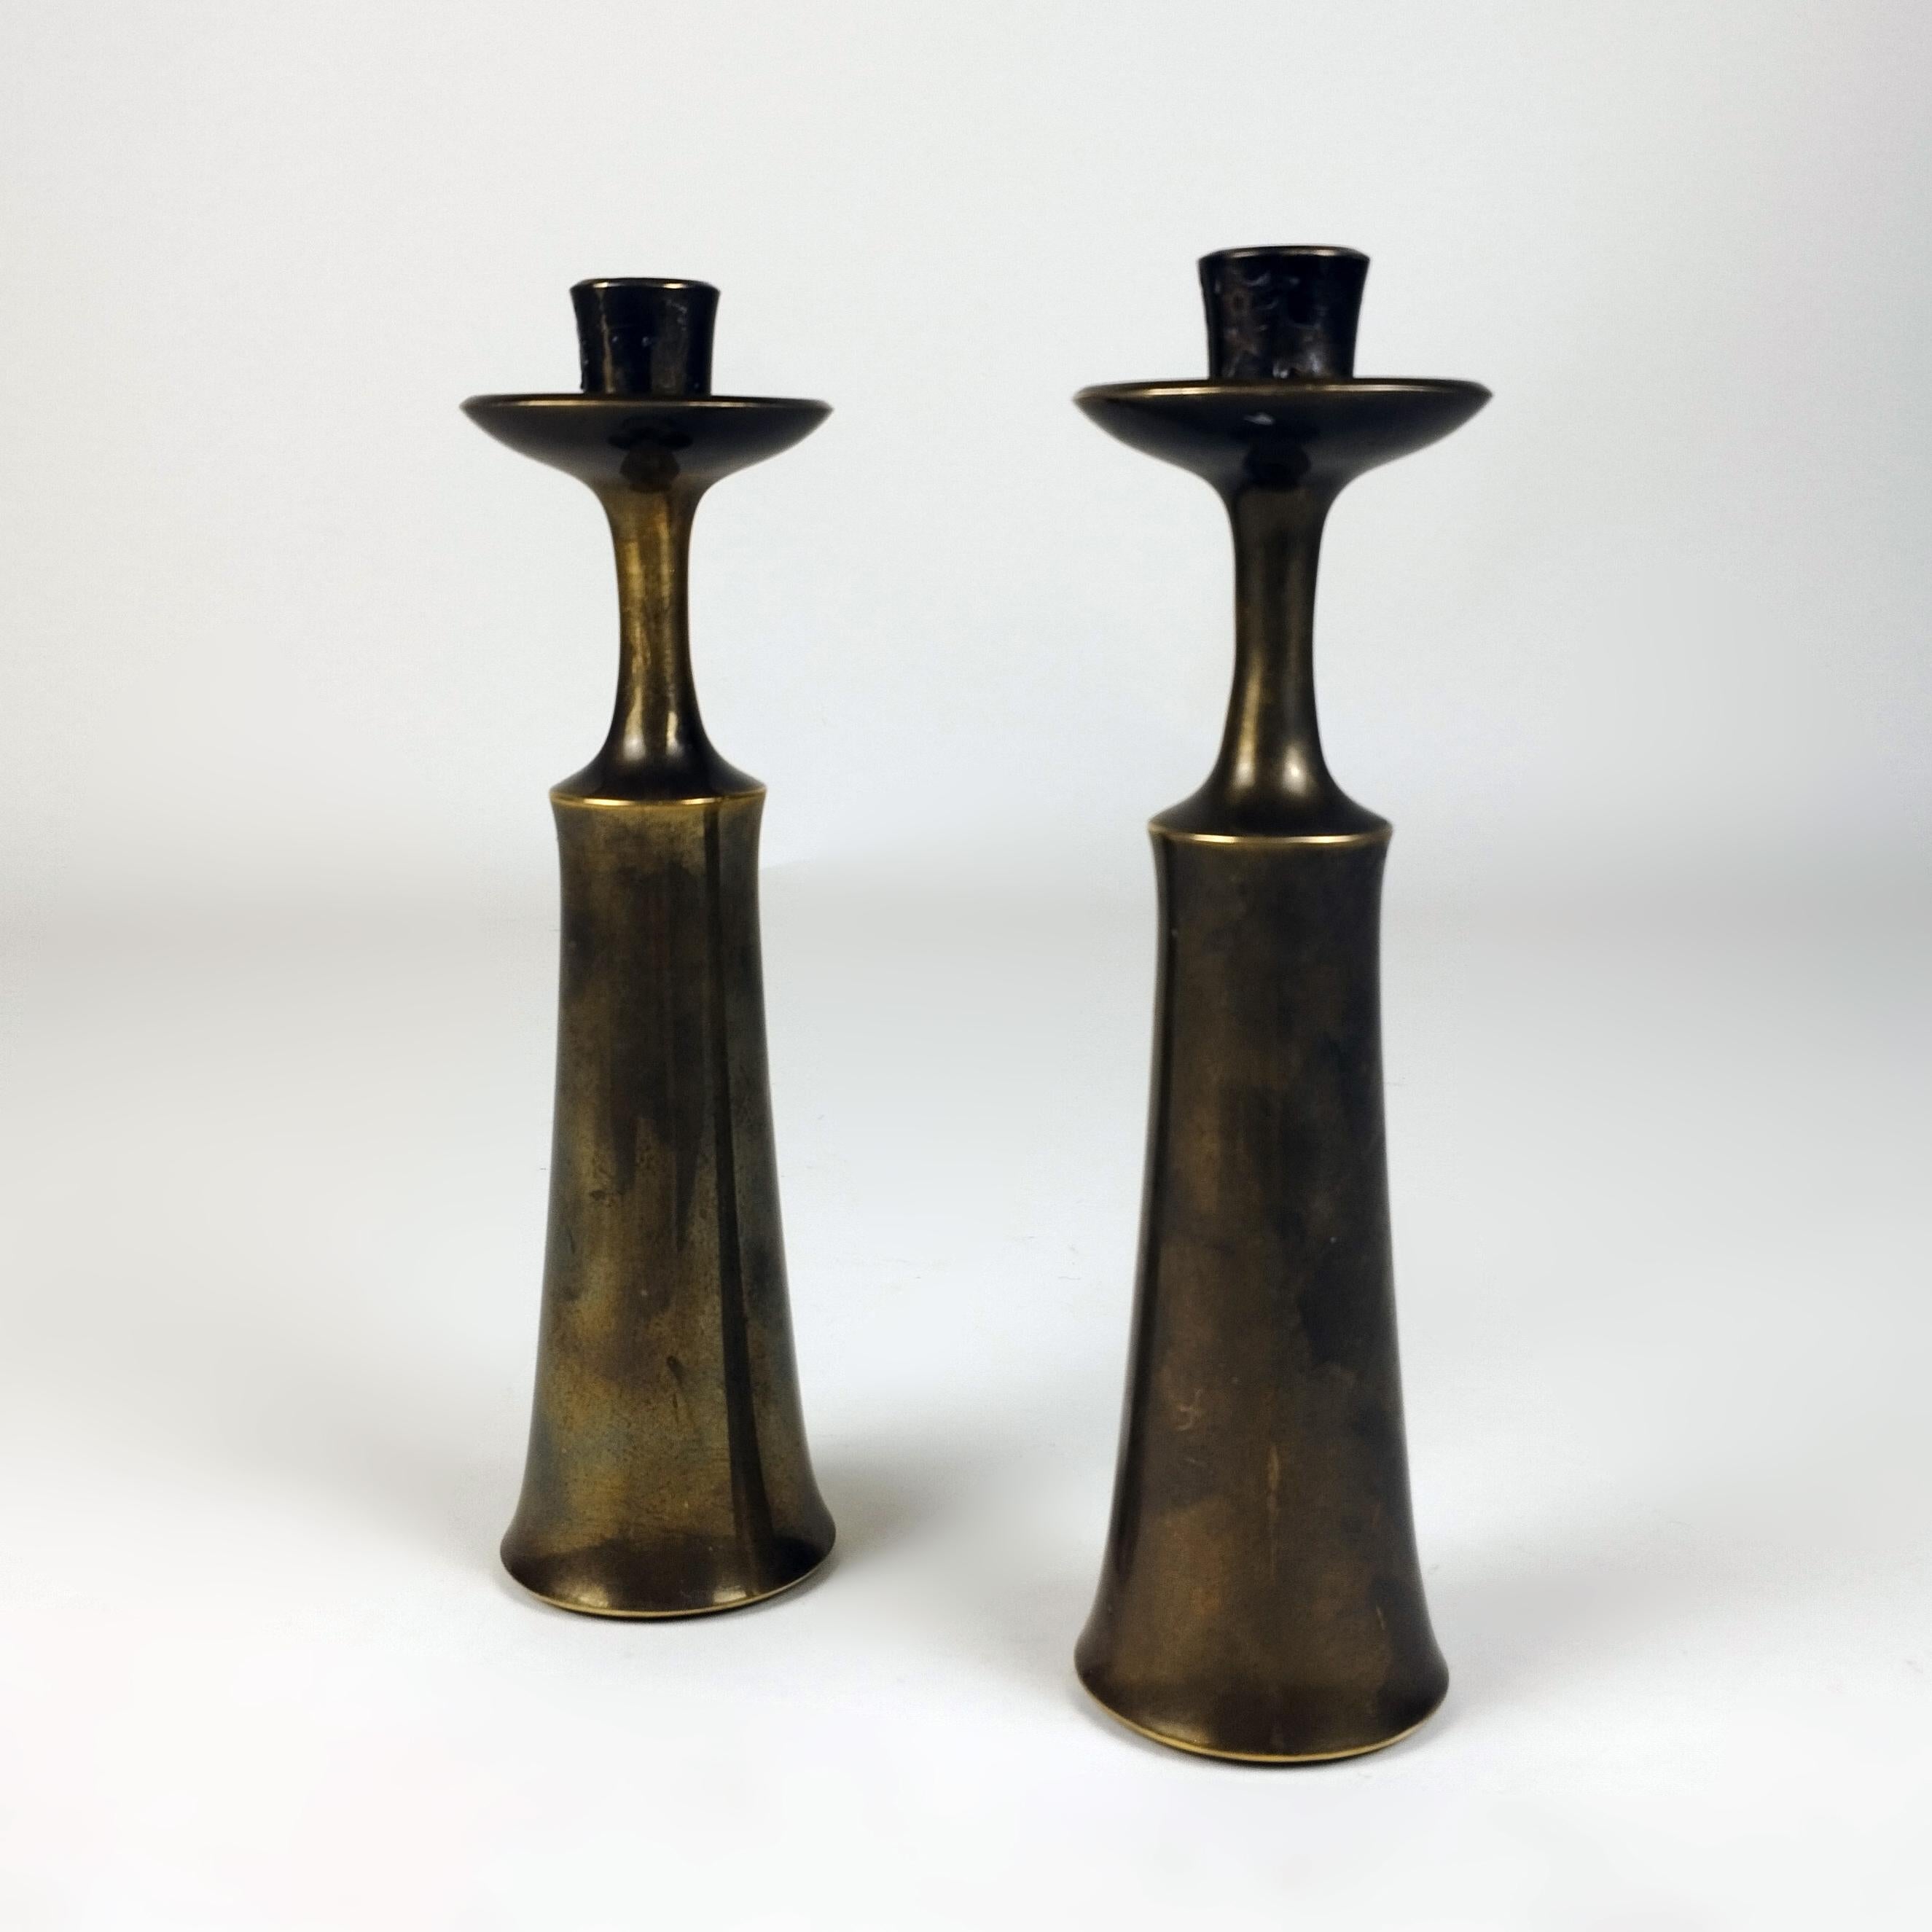 A pair of Danish 1960's brass candle sticks by Jens Harald Quistgaard for Dansk Designs. Both candlesticks are sealed on the lower interior.